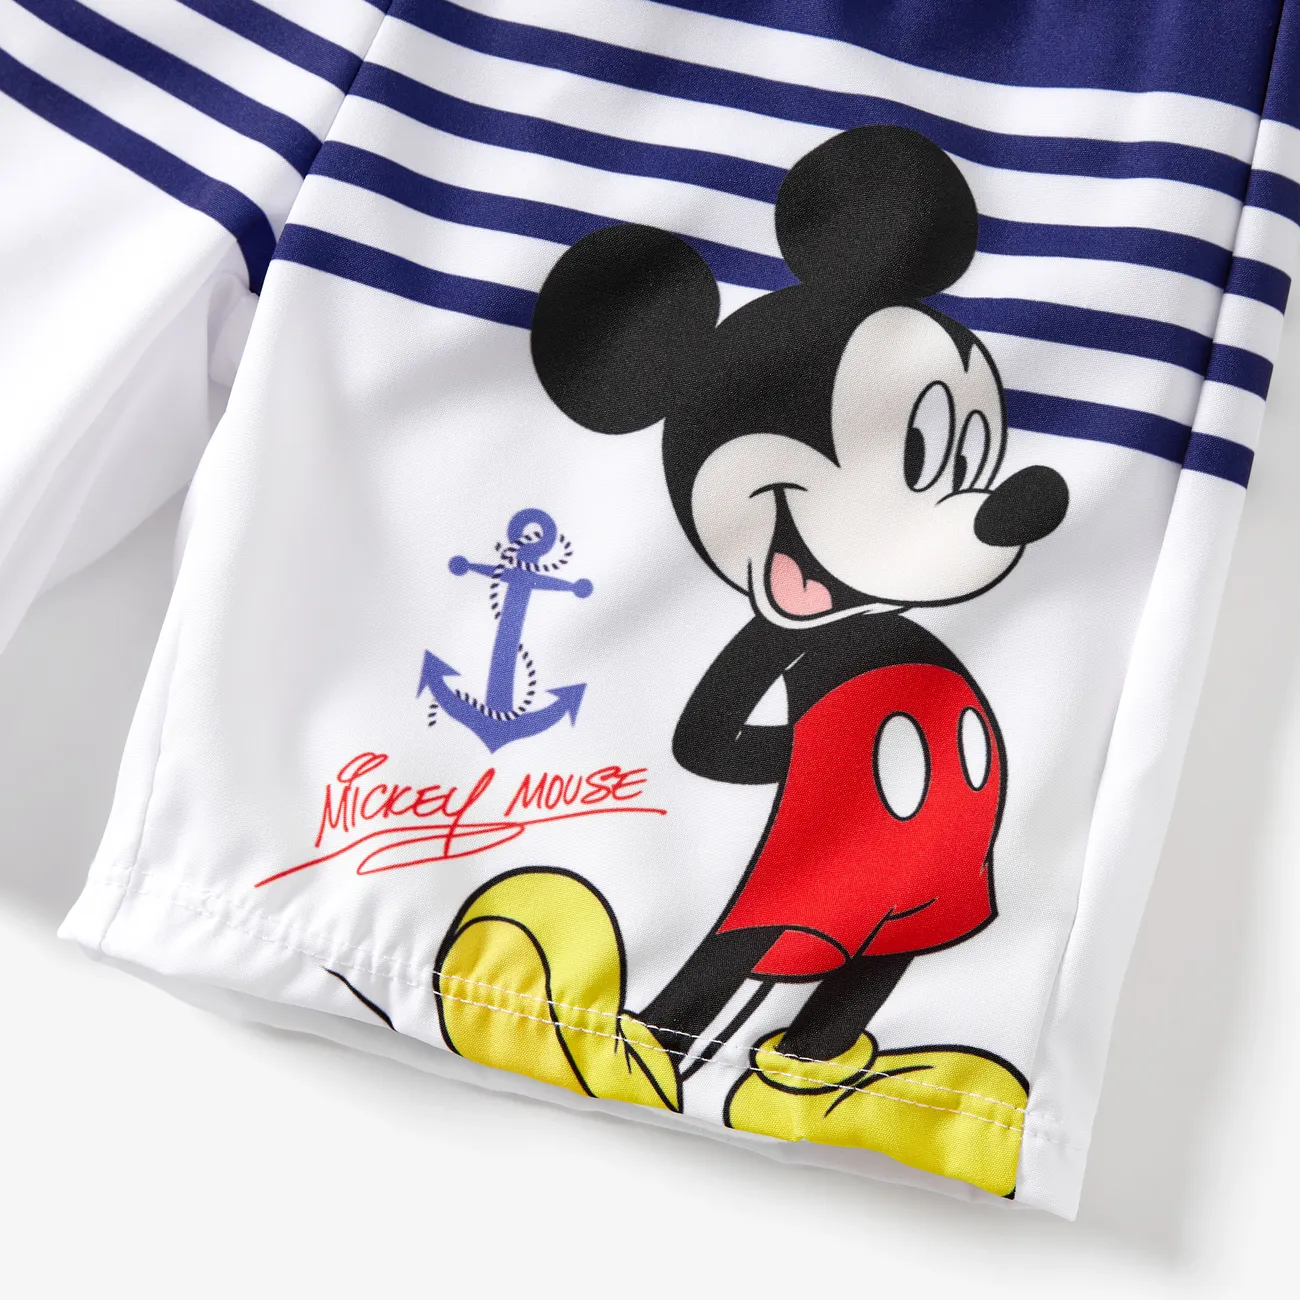 Disney Mickey and Friends Muttertag Geschwister-Outfits Badeanzüge dunkelblau big image 1